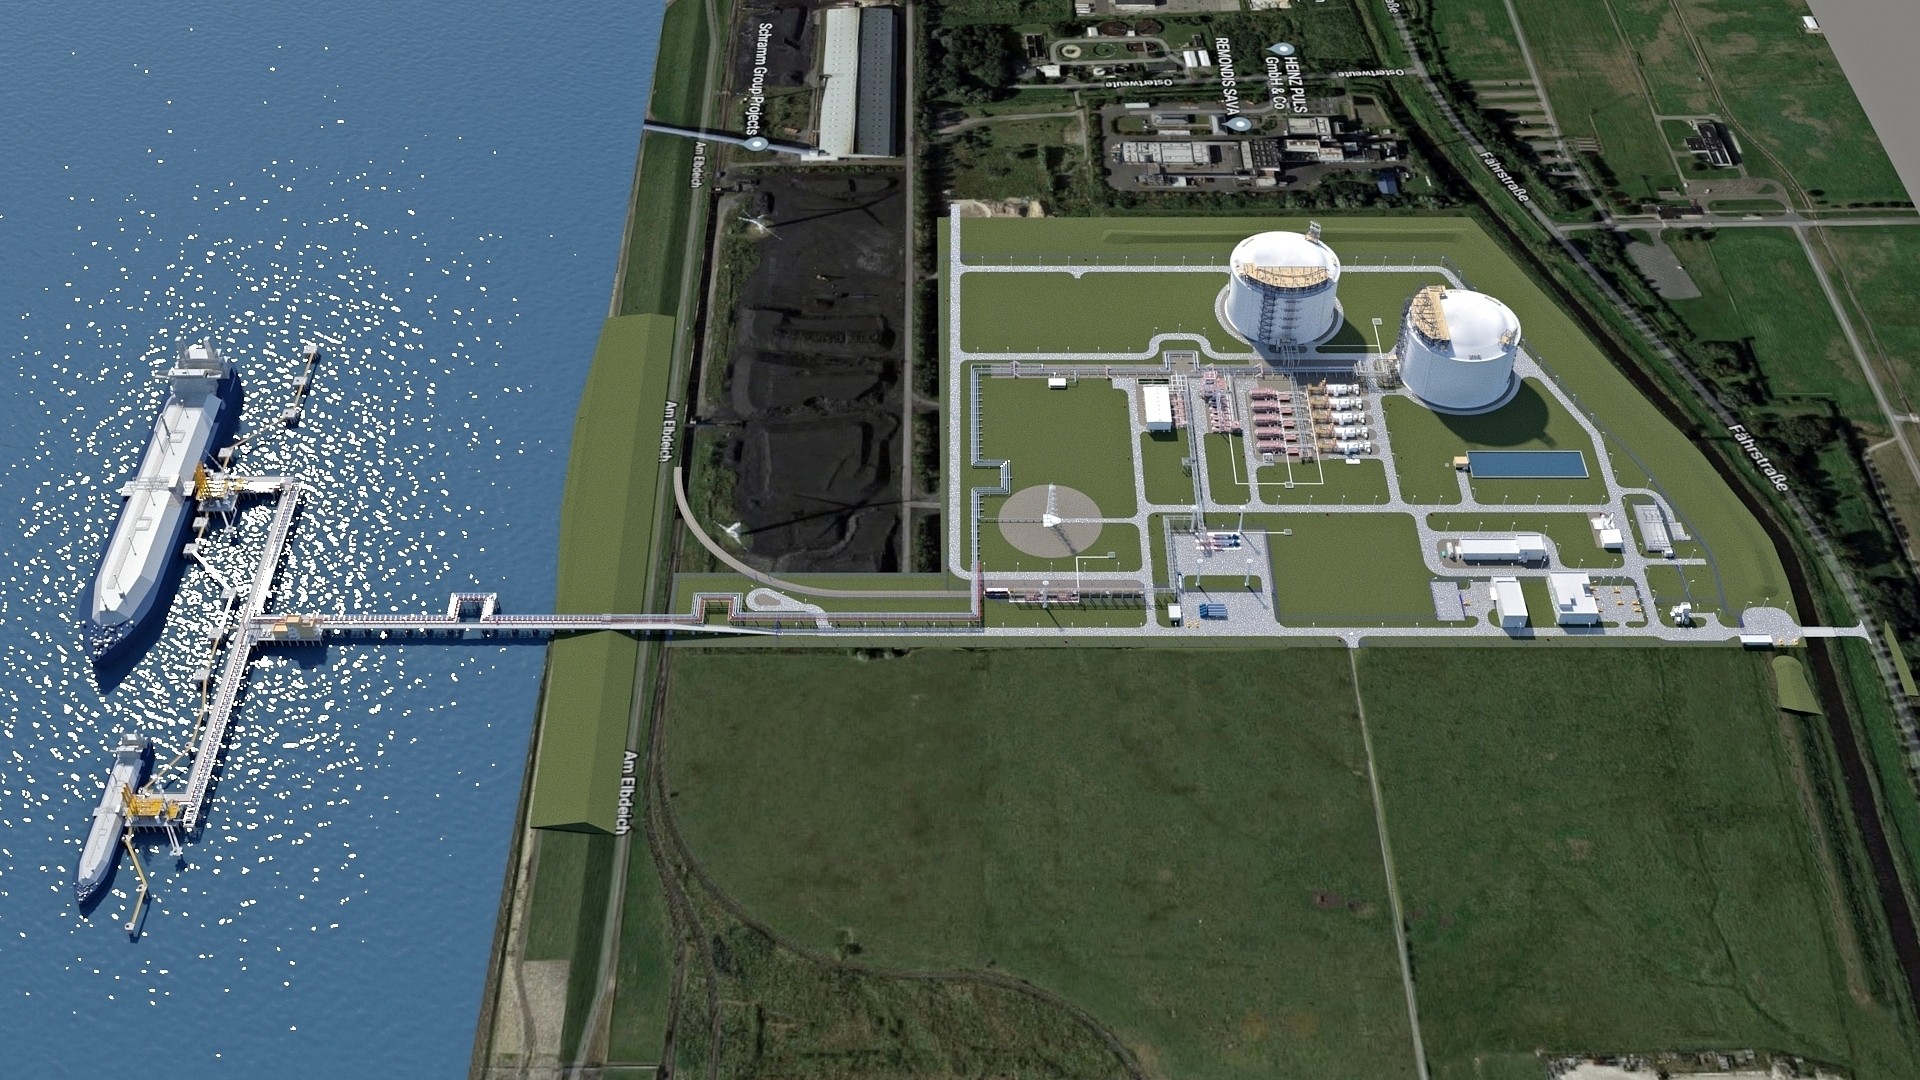 Exemption decision for German LNG terminal approved by EU